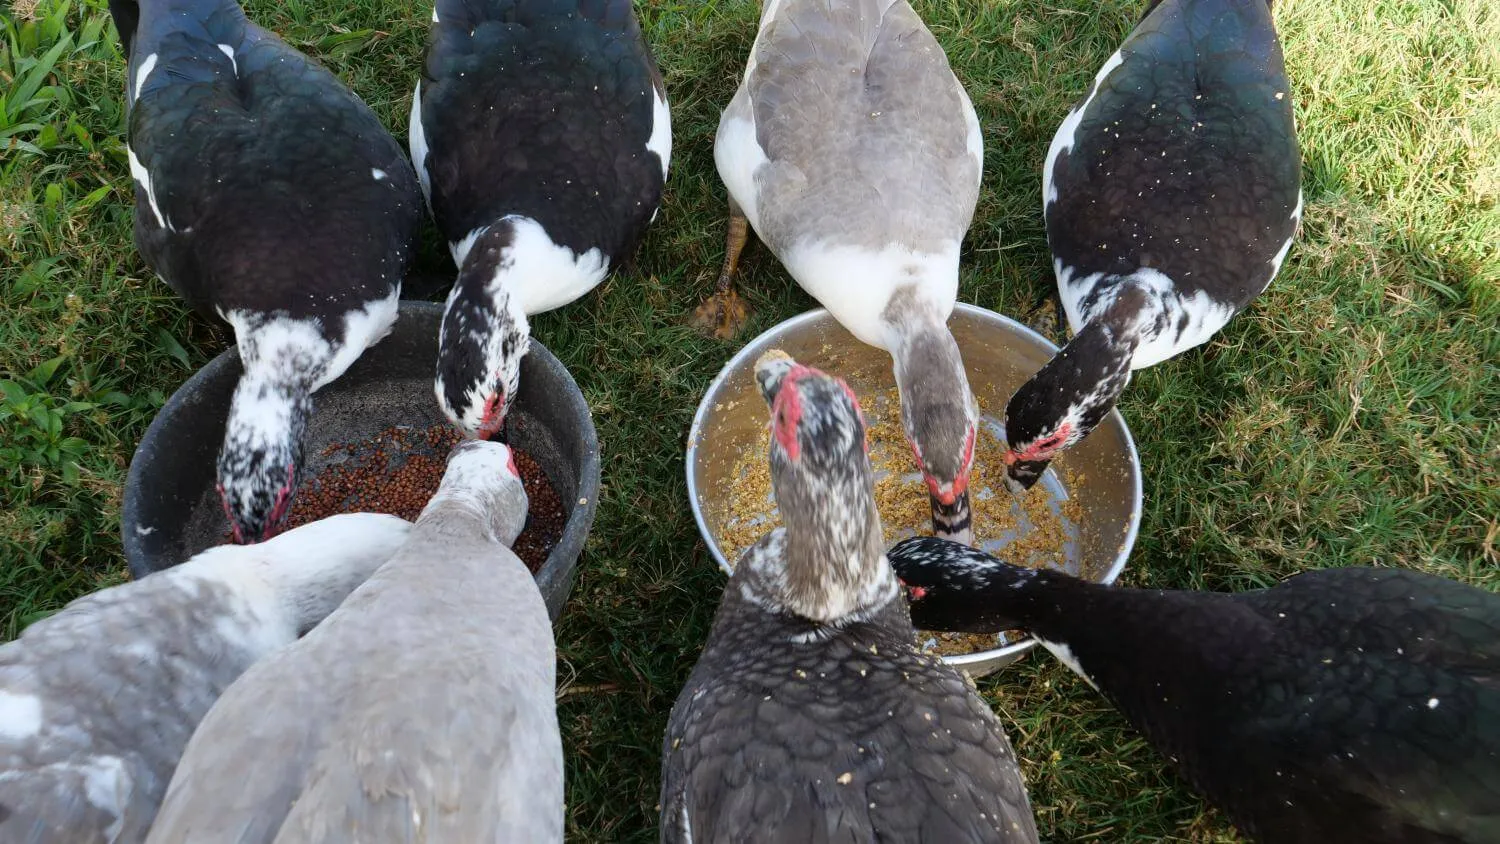 muscovy ducks eating out of bowls